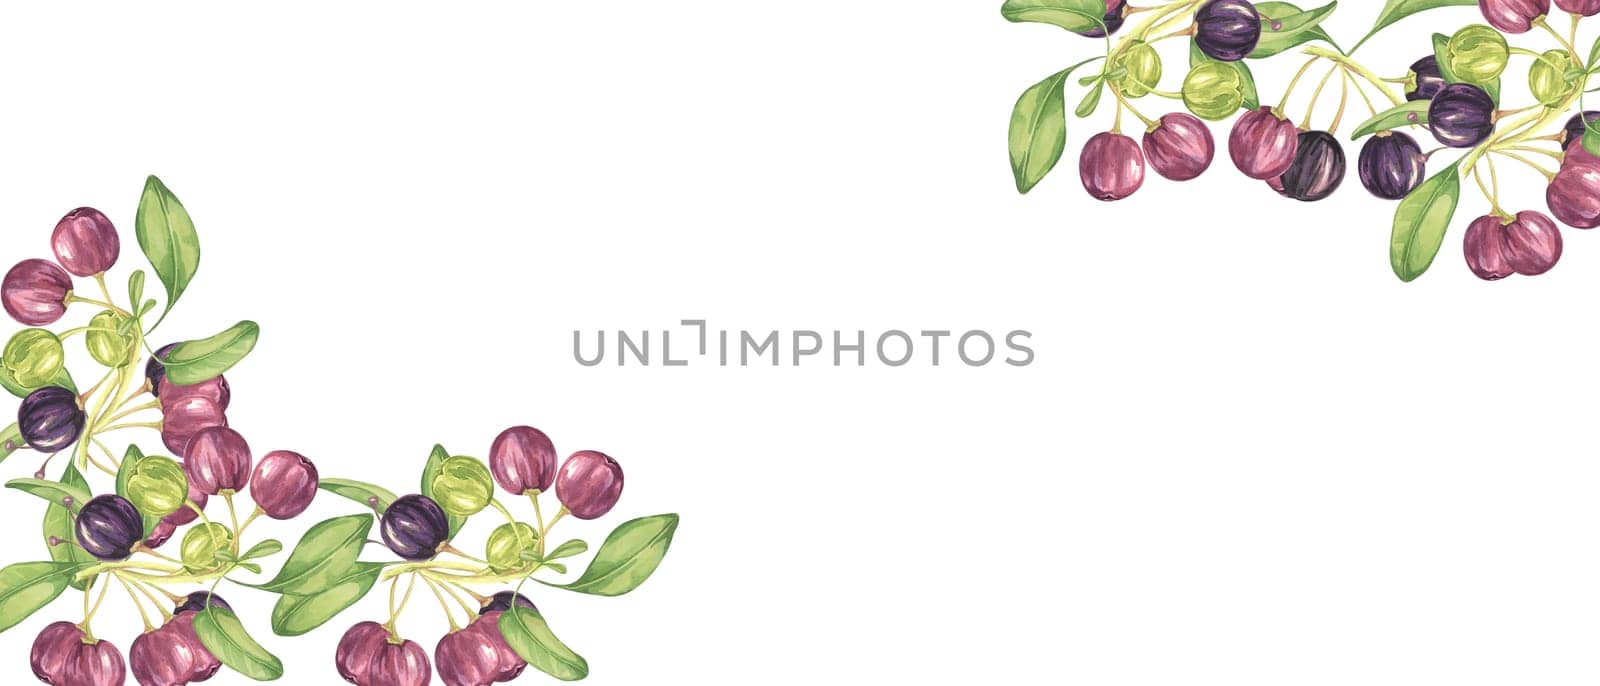 Maqui berry and leaves in purple and green banner. Hand drawn watercolor illustration Chilean wineberry cherry plant, Aristotelia chilensis for printing, food supplement, apparel, cards, web template